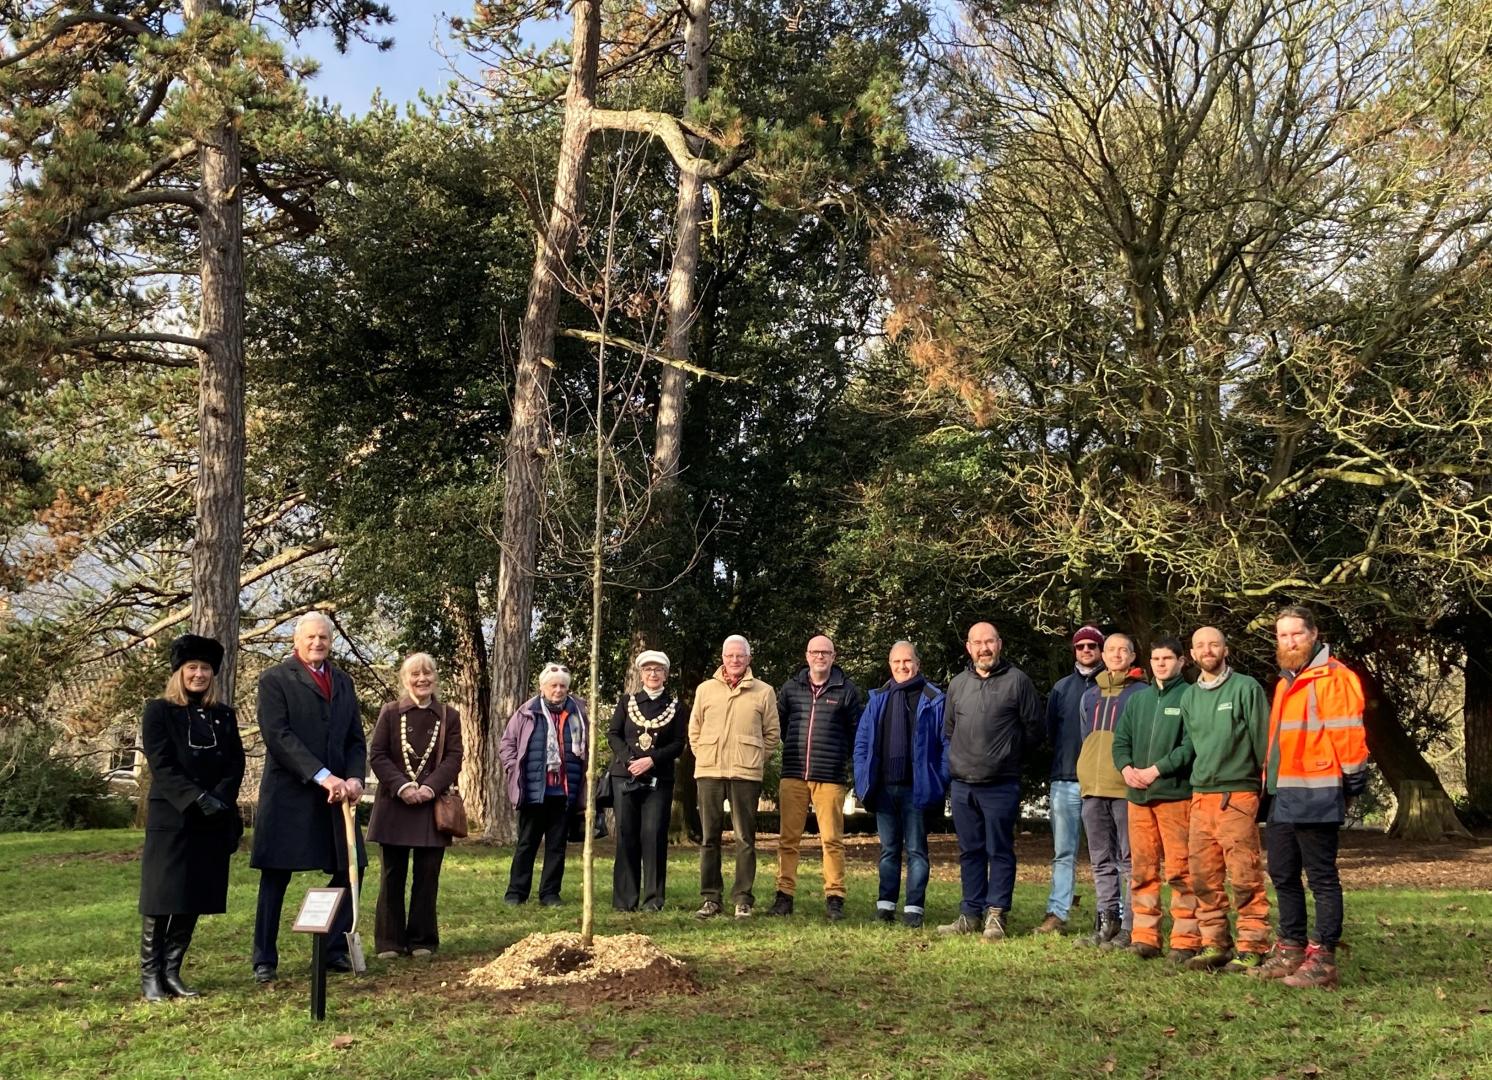 A photo of dignitaries, council officers and Glendale contractors at a planting of an oak tree in memory of Her Majesty Queen Elizabeth II at Ashcombe Park in Weston-super-Mare